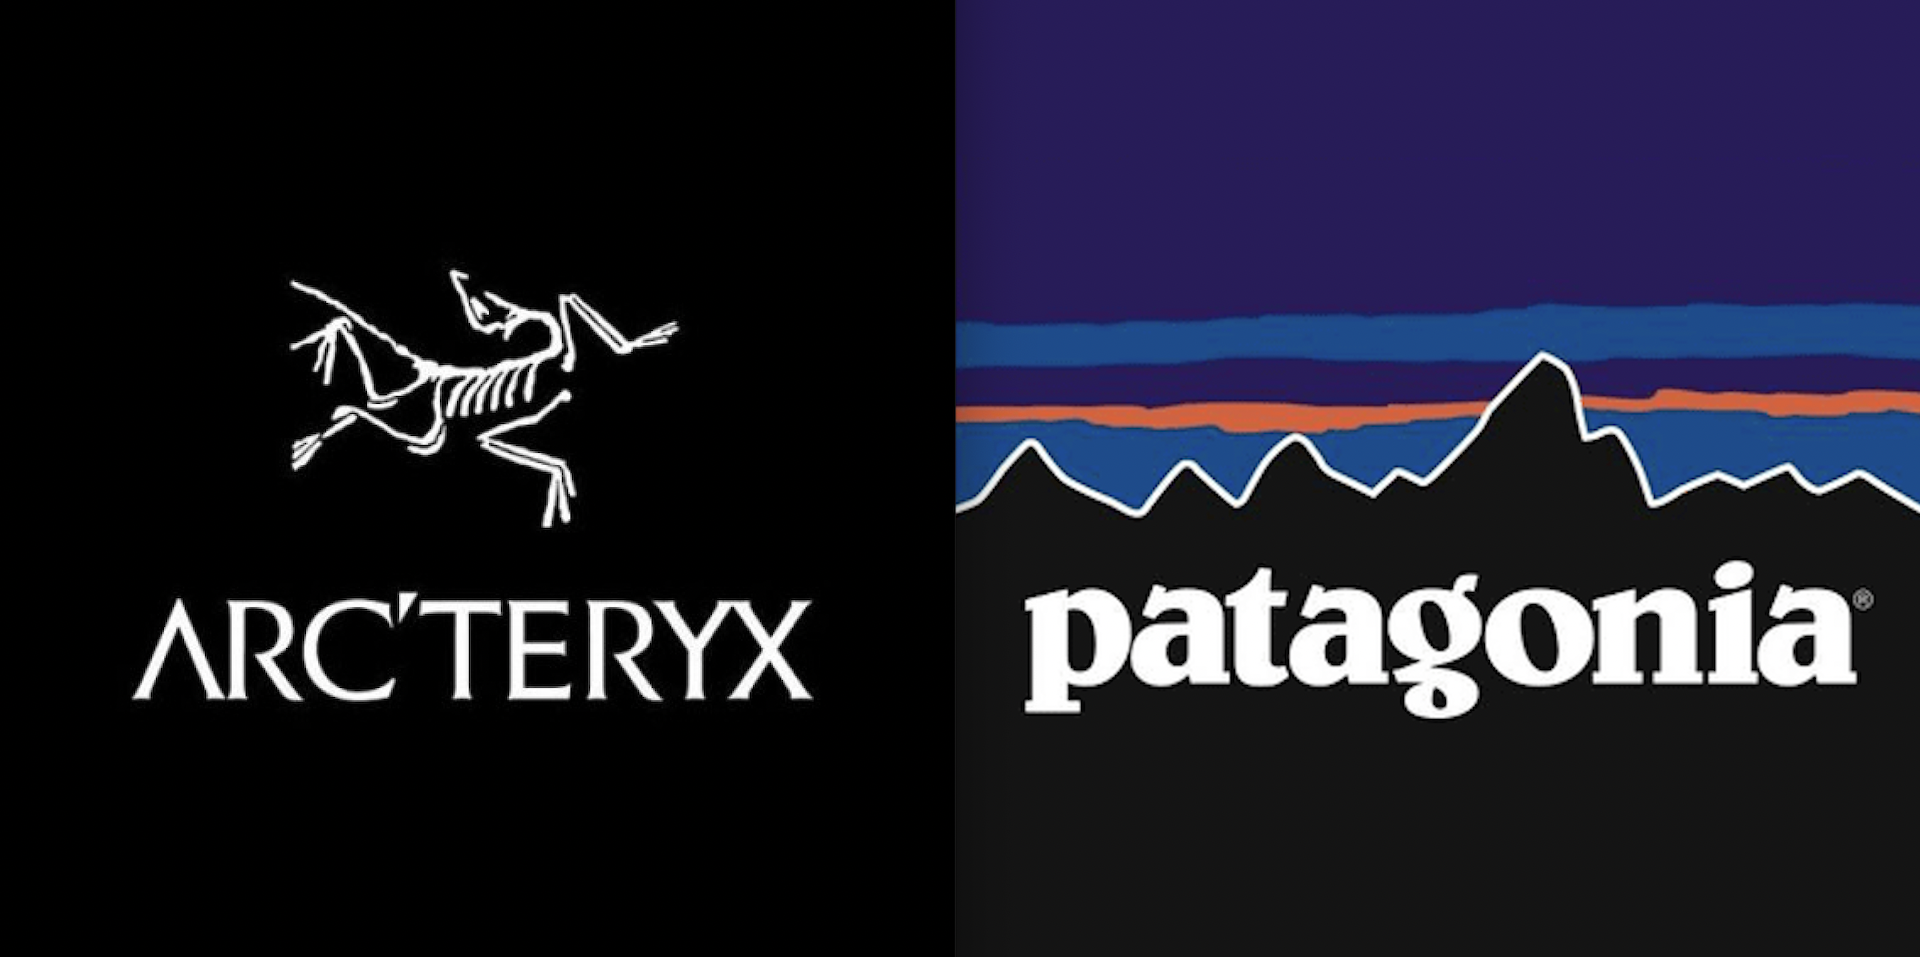 peeling Fitness sagtmodighed Patagonia vs Arc'teryx - comparing two outdoor apparel brands | Advnture